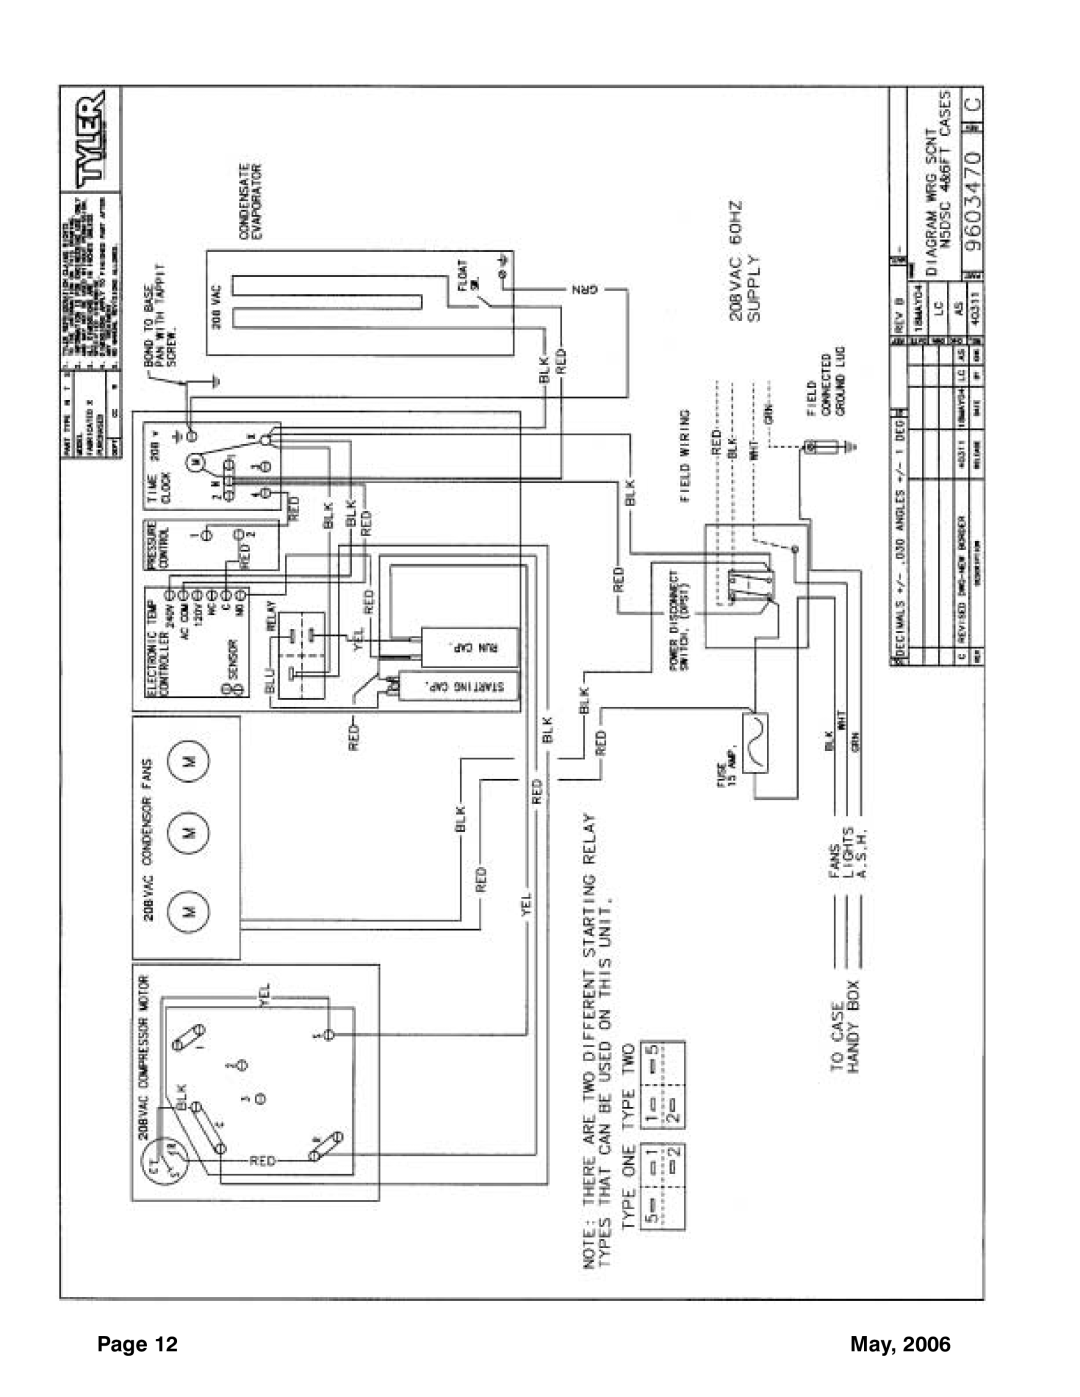 Tyler Refrigeration N5DL, N5DH, N5DSC service manual Page, May 